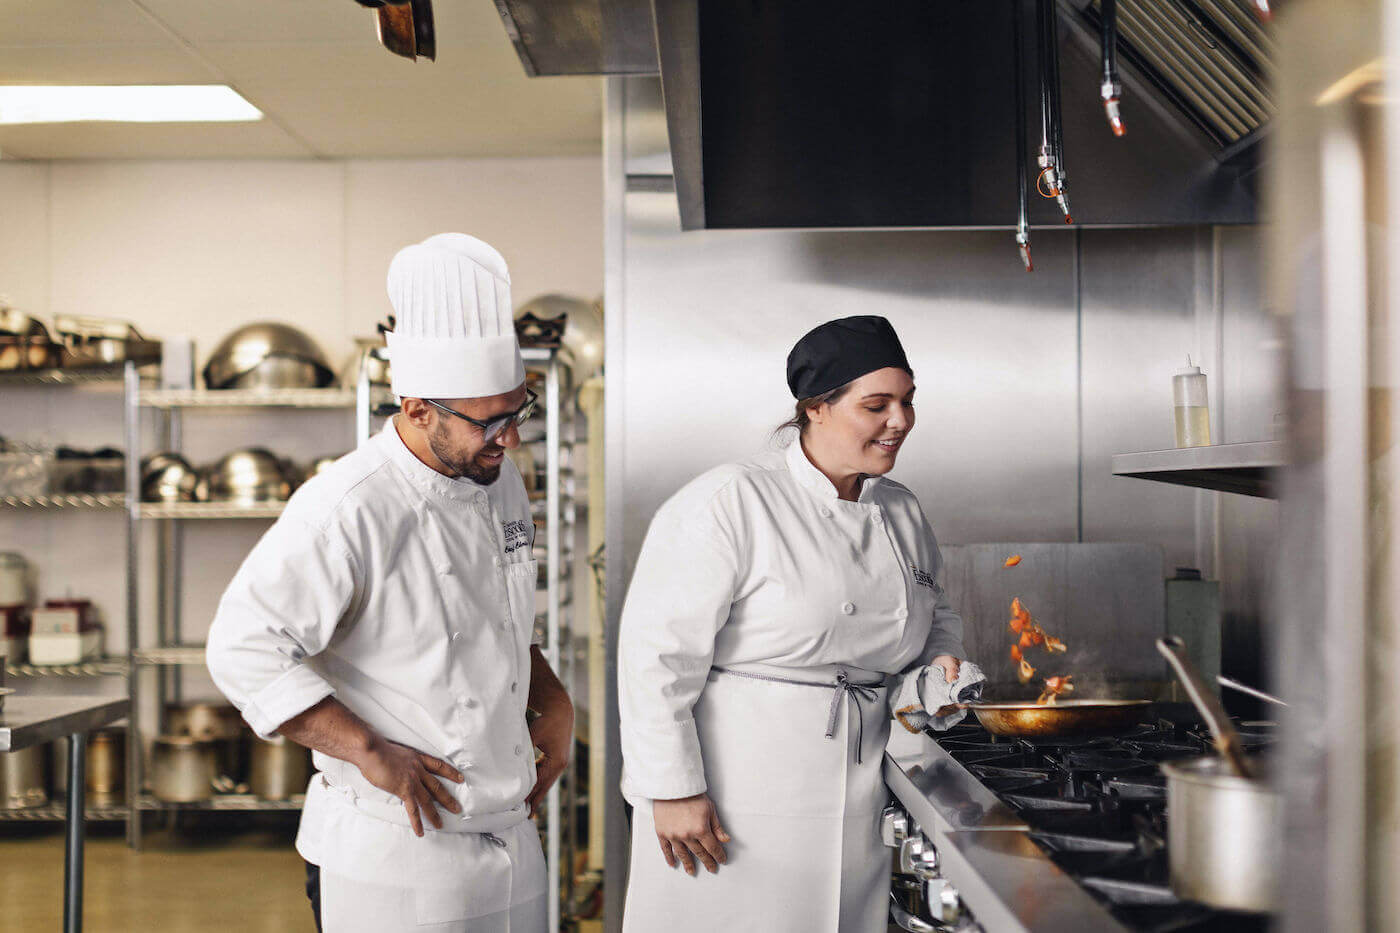 Escoffier student flipping ingredients in a pan while Chef Instructor watches